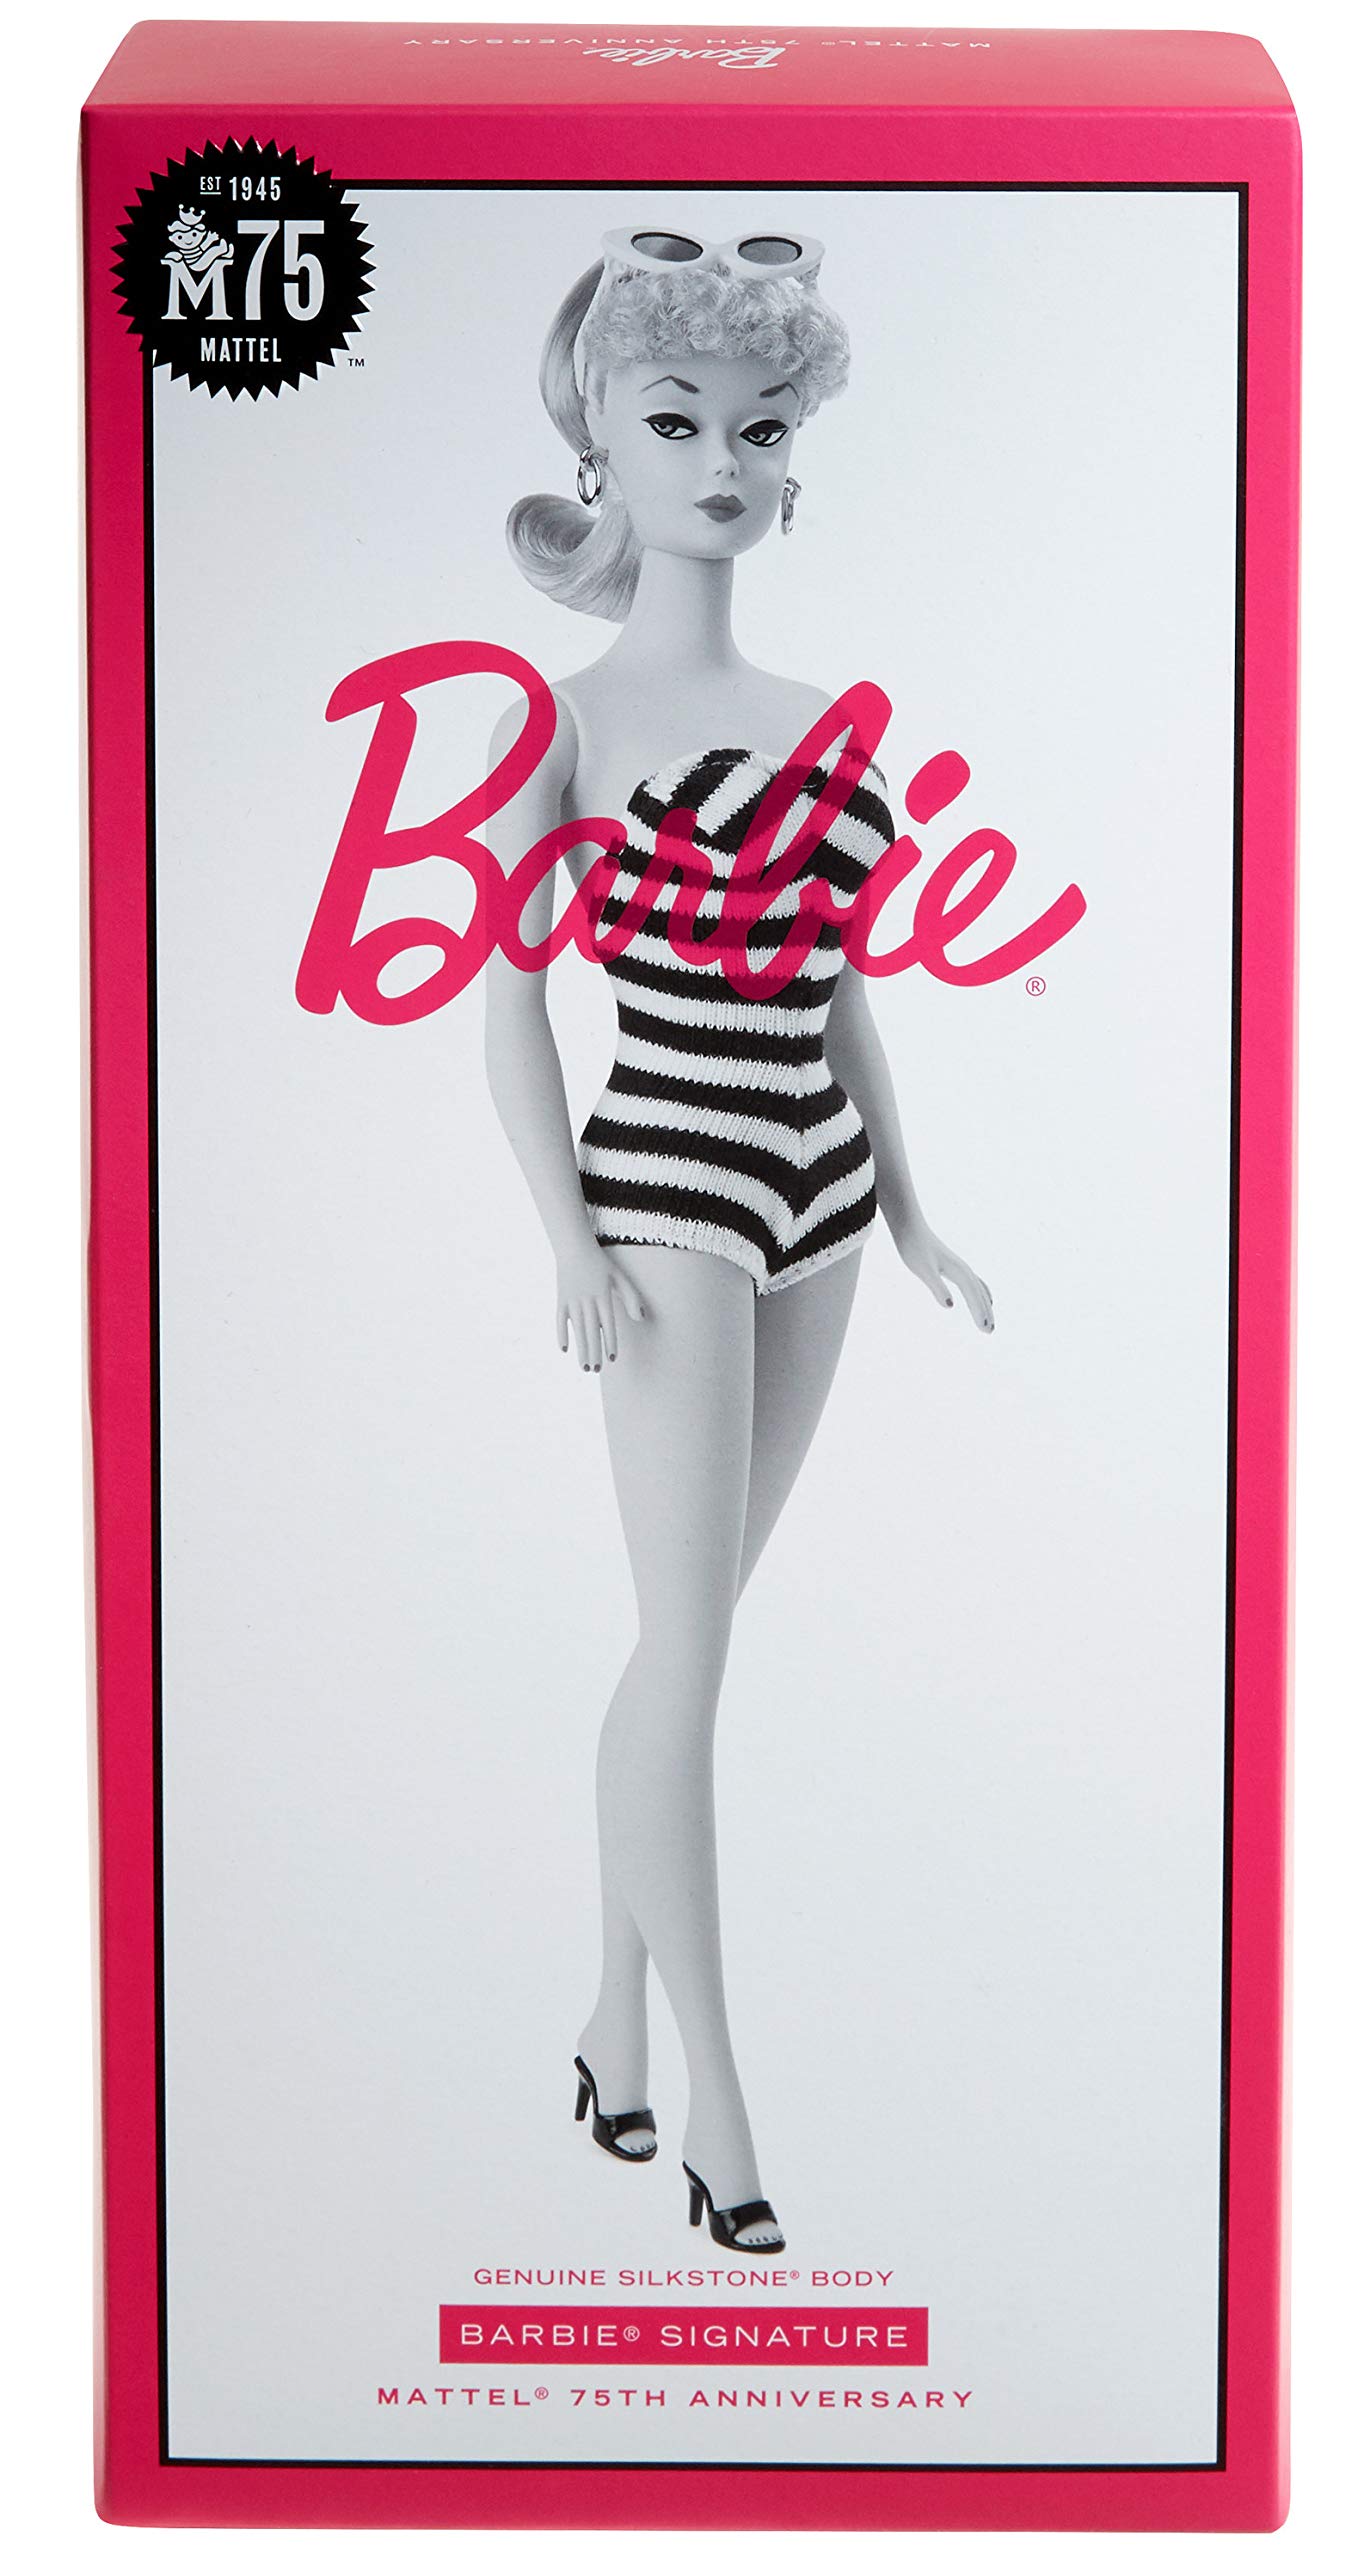 Barbie Signature Mattel 75th Anniversary Doll, Original 1959 Doll Reproduction in Black and White Swimsuit, with Wrist Tag, Gift for Collectors, Multi